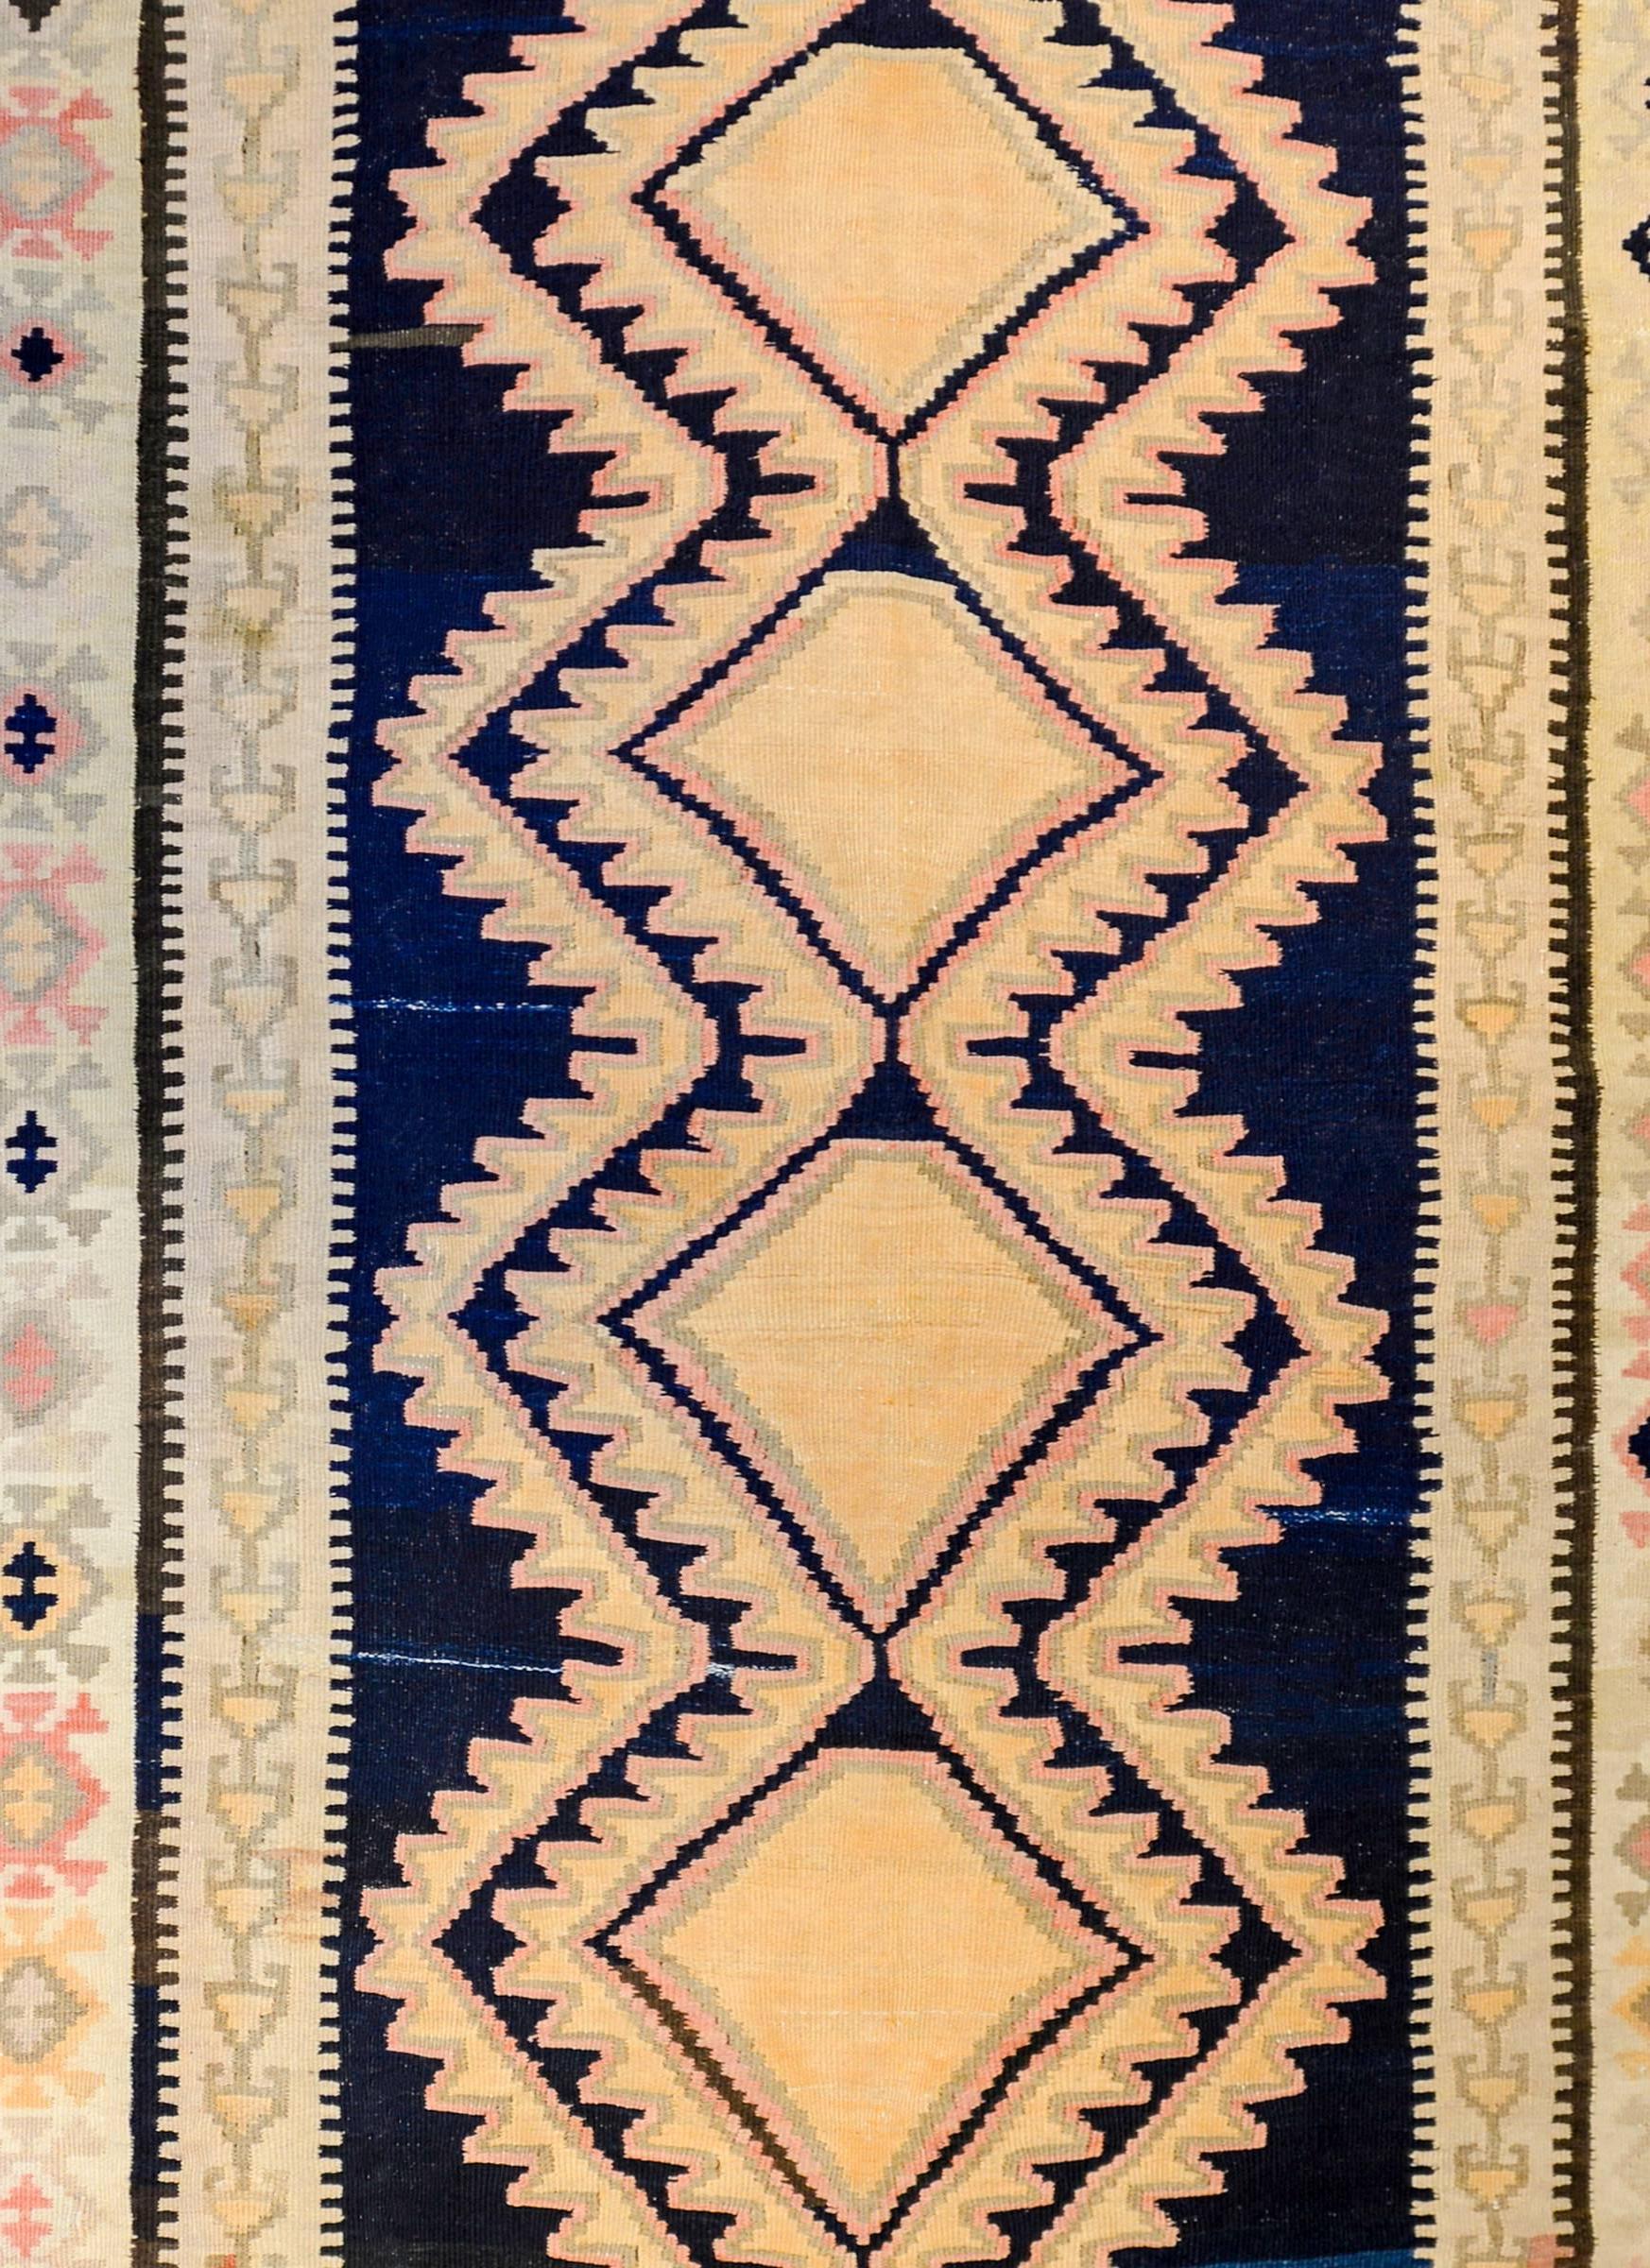 An early 20th century Persian Ersin wide Kilim runner with an incredible pattern woven with six large gold diamond medallions flanked with two gold and pale pink zigzag stripes on a dark abrash indigo background. The border is composed with two